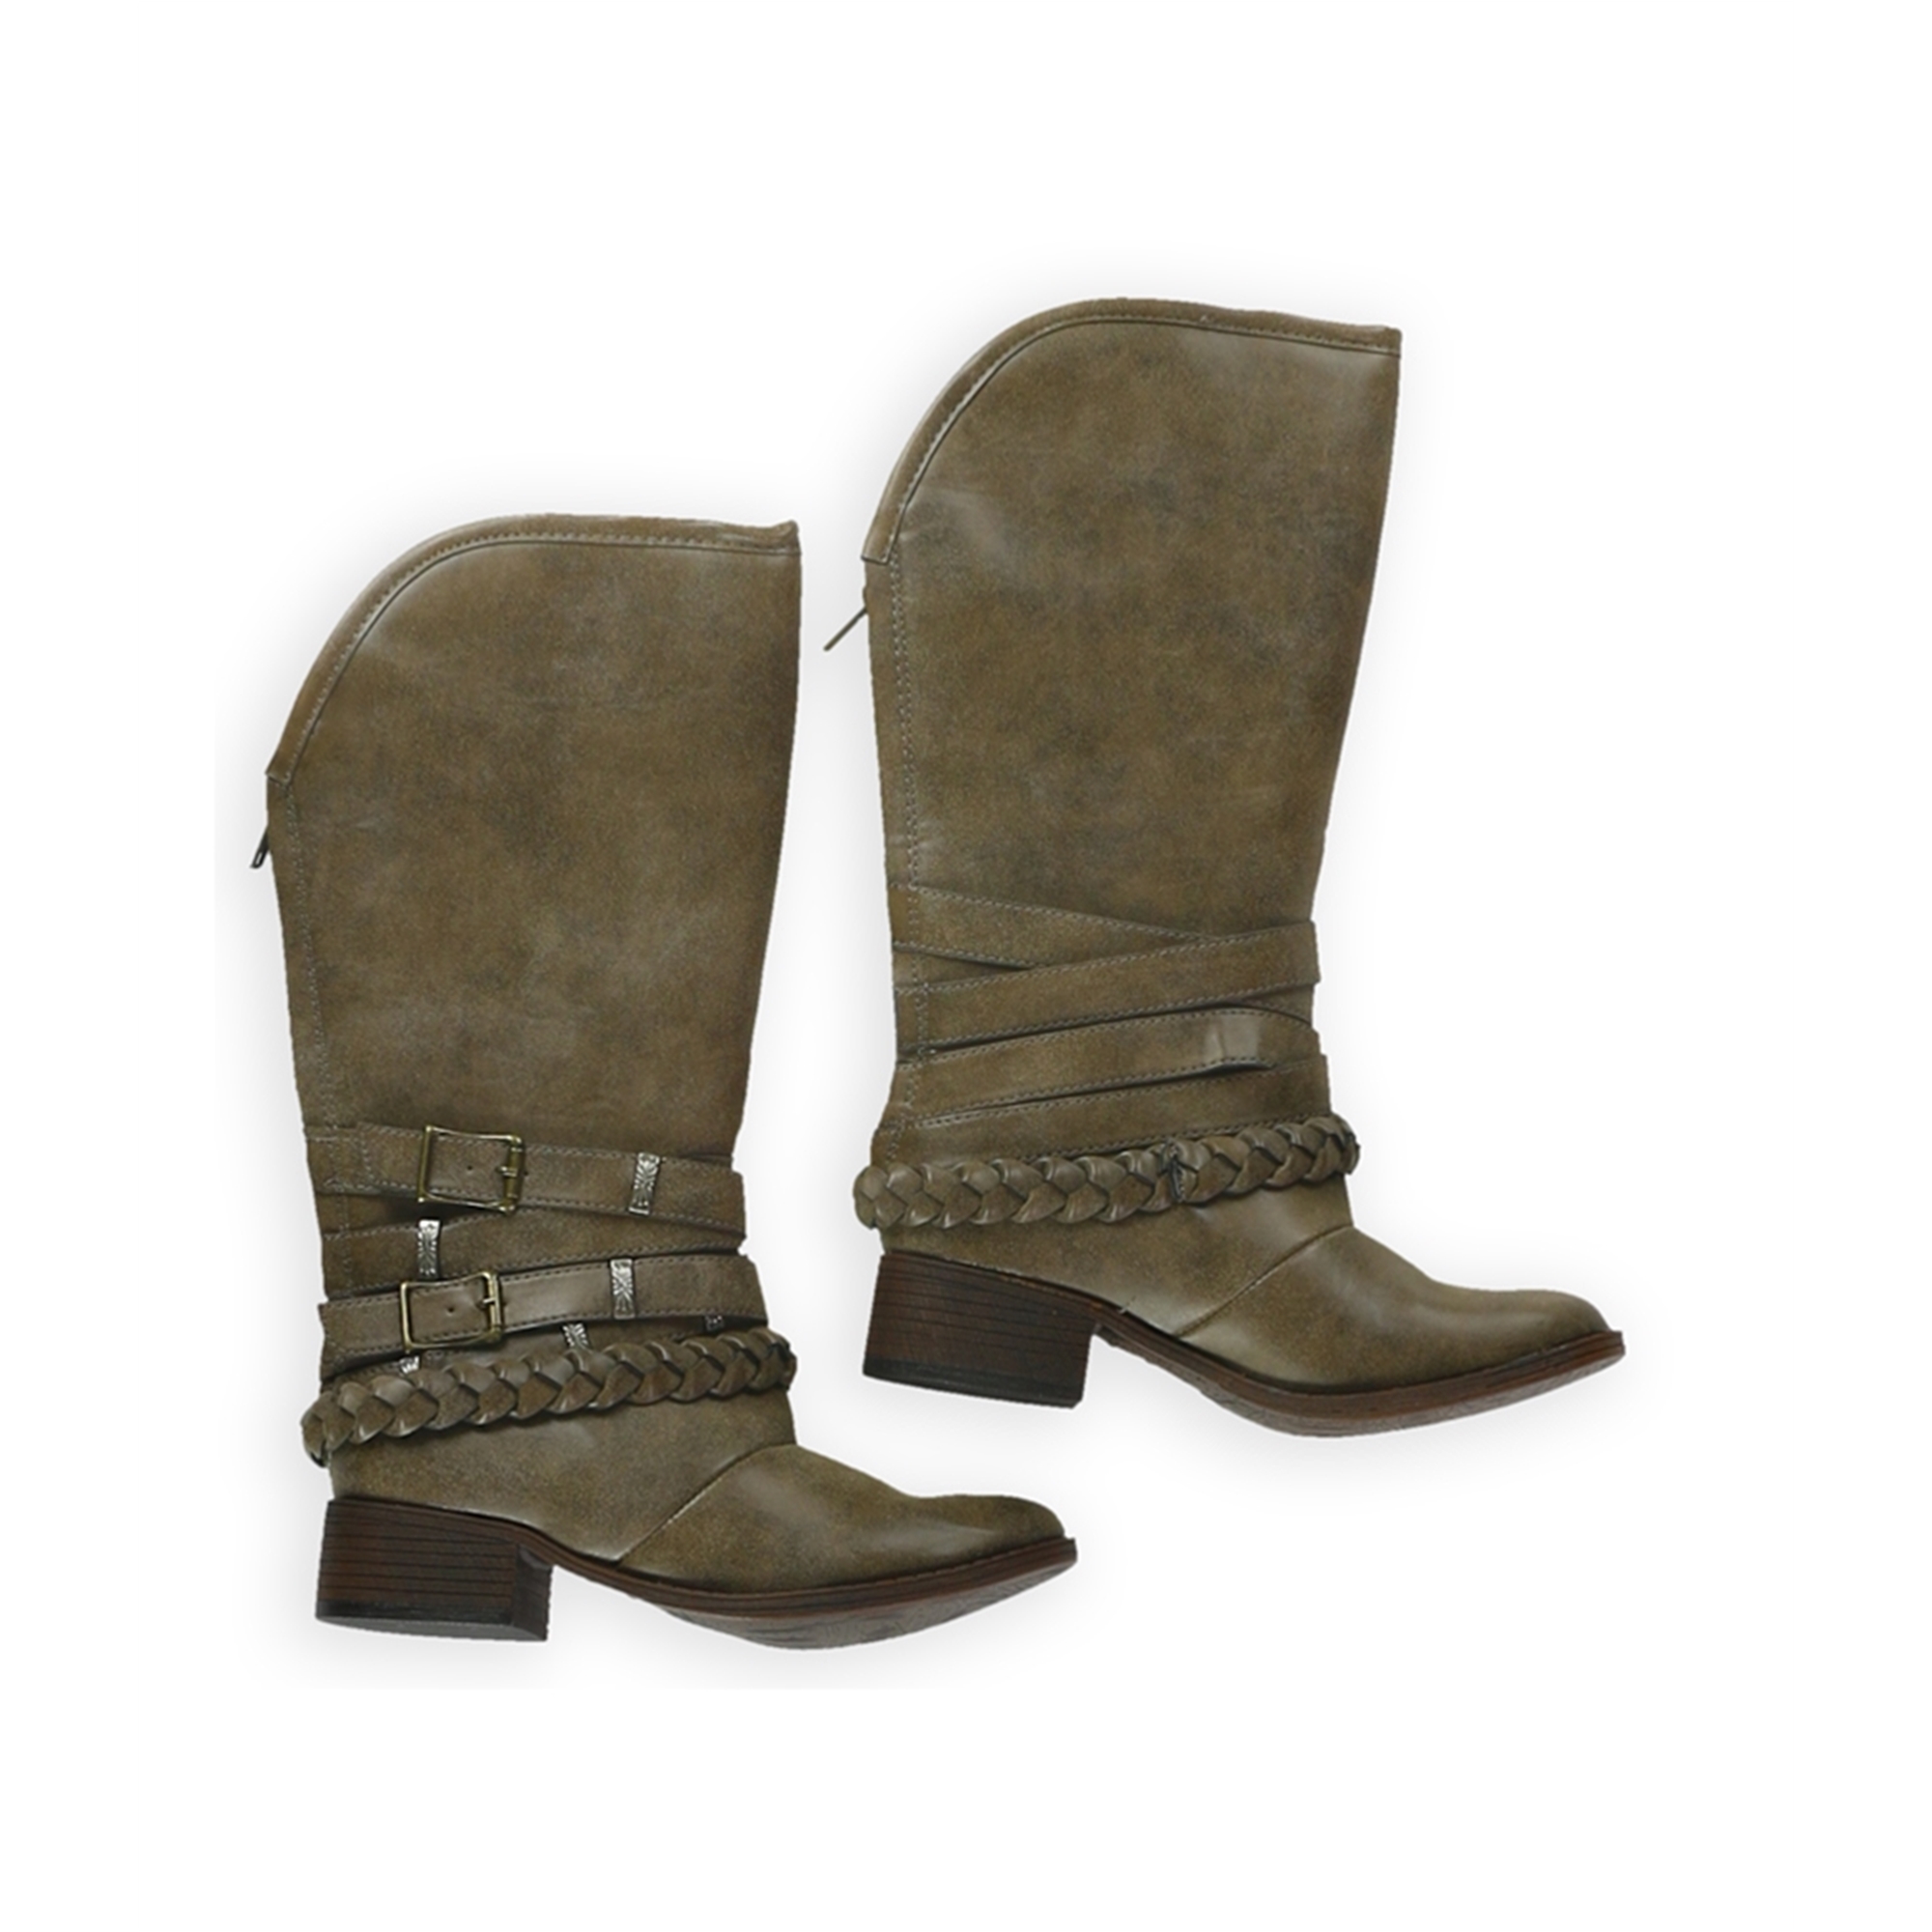 Candie's Womens Buckle Strap Riding Boots | Womens Footwear | Free ...